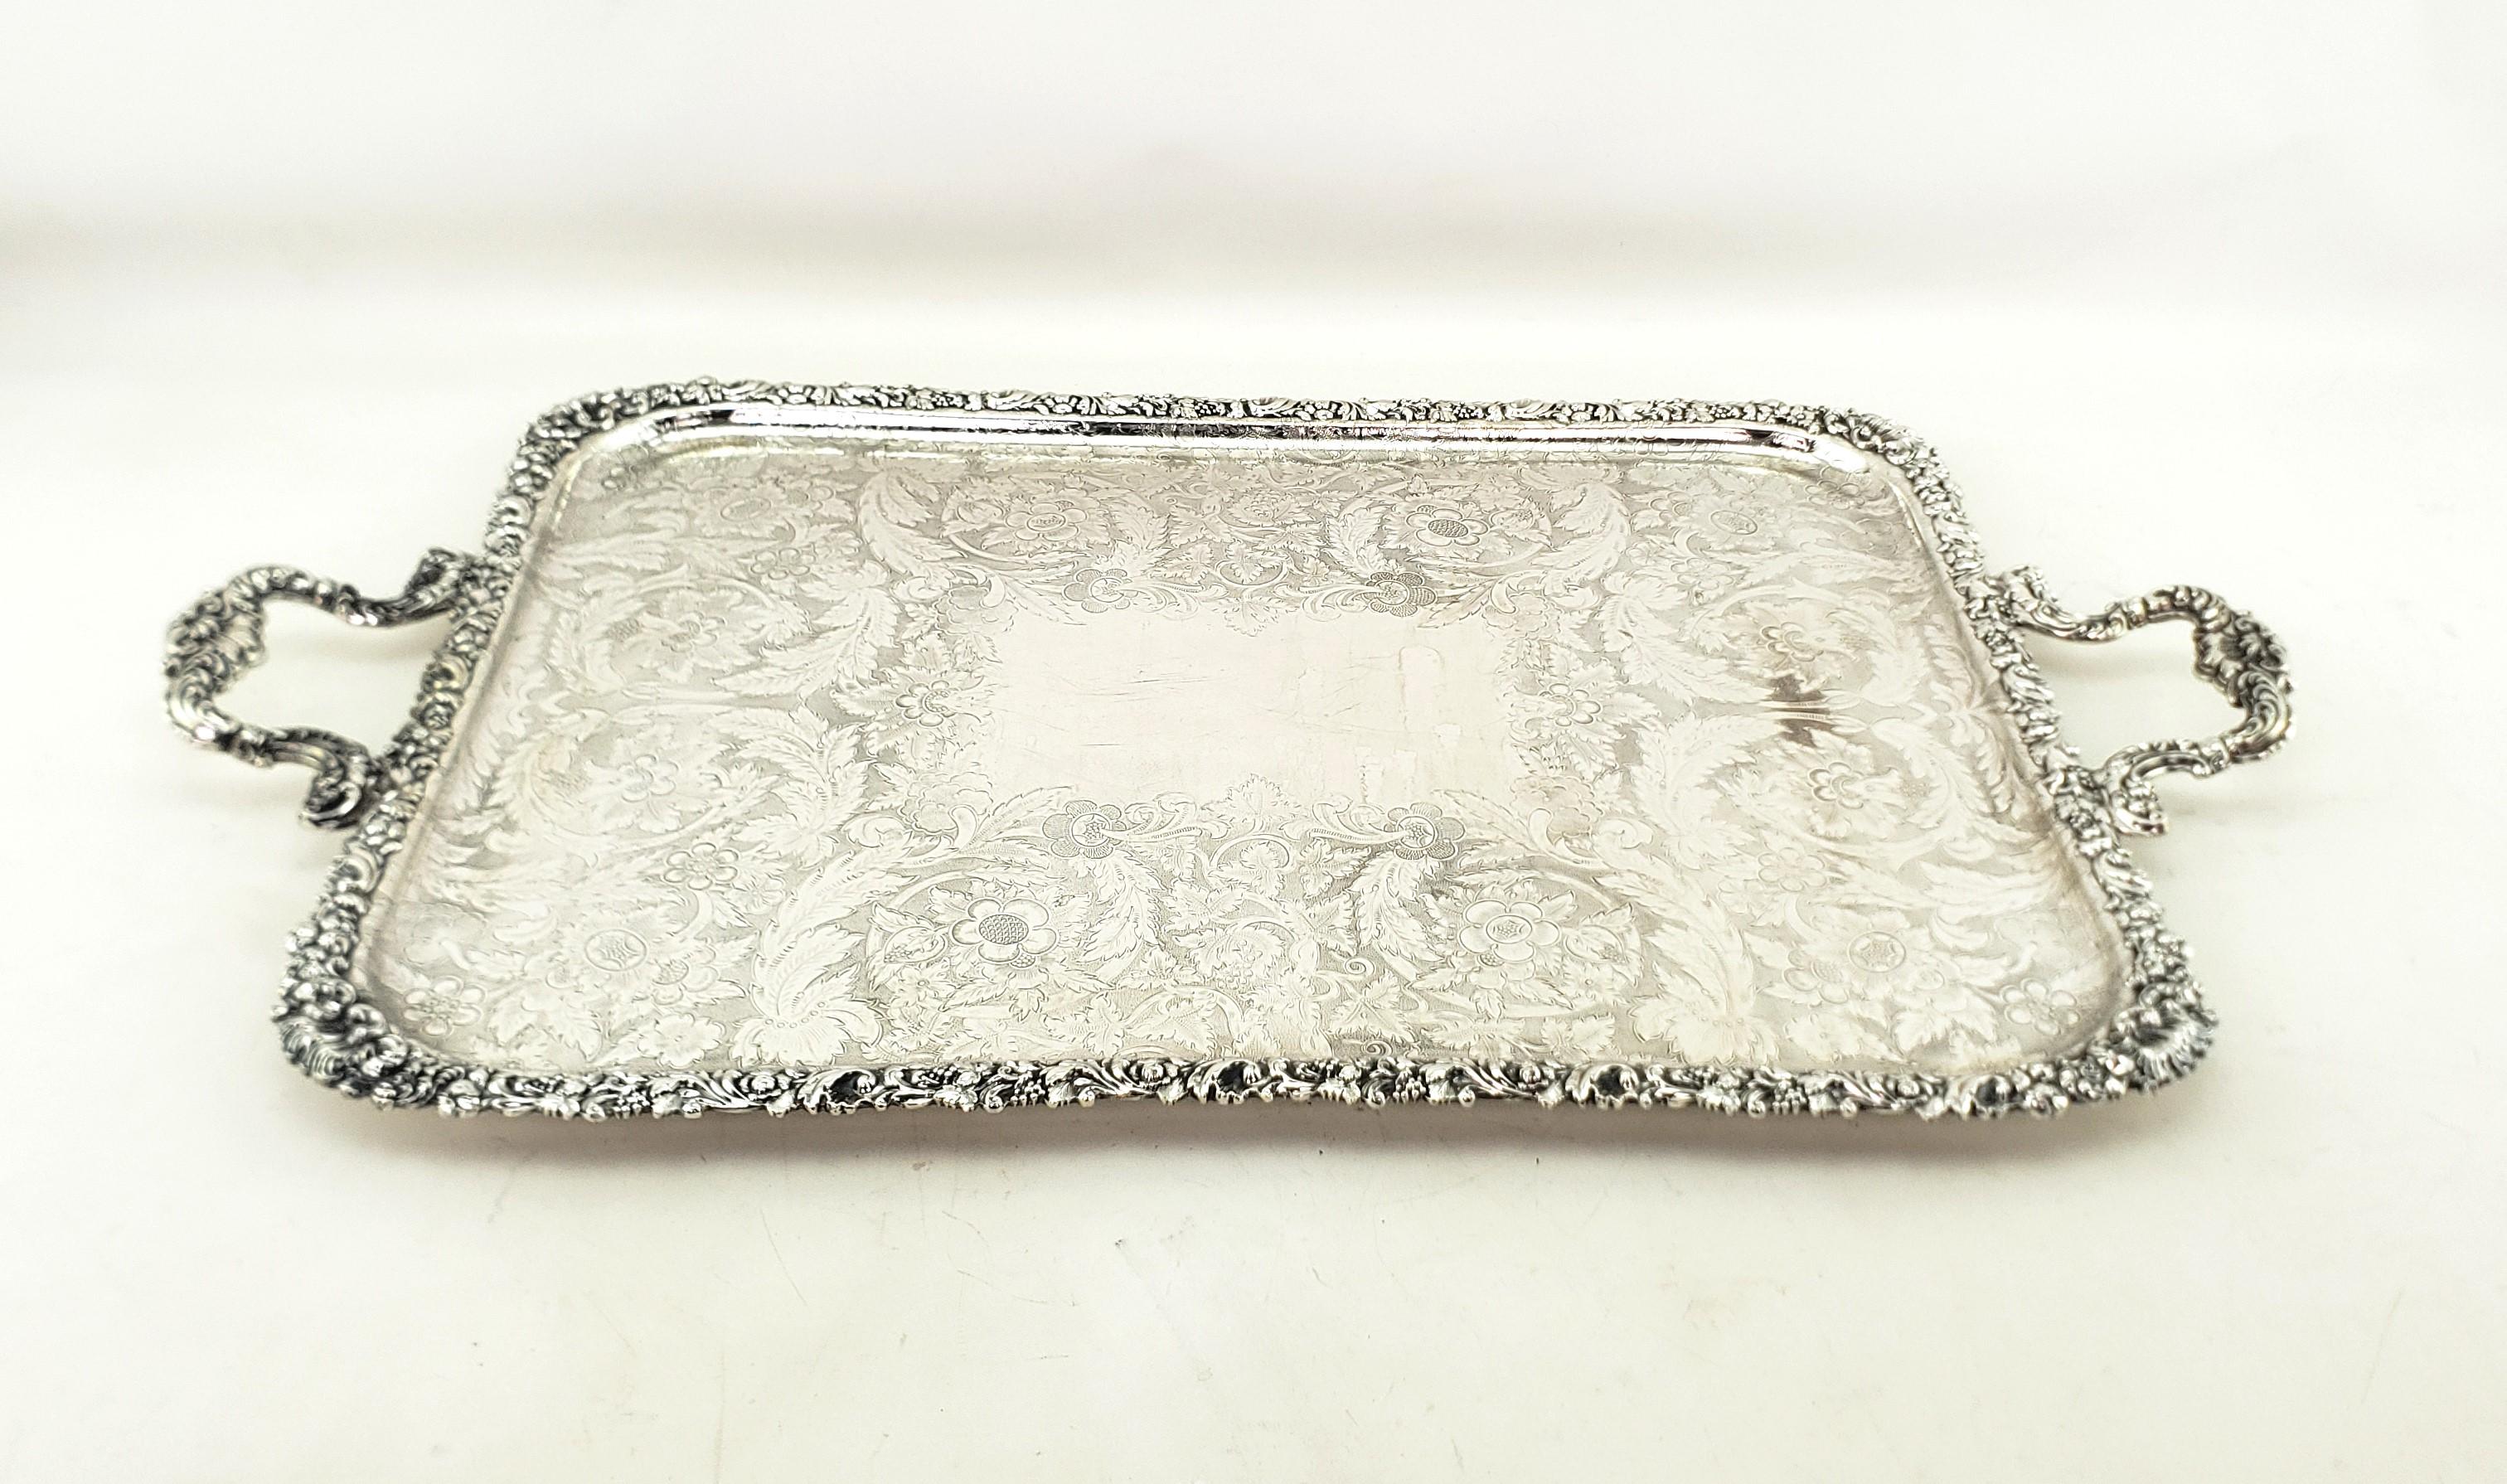 Large Antique Birks Silver Plated Serving Tray with Leaf & Berry Decoration In Good Condition For Sale In Hamilton, Ontario